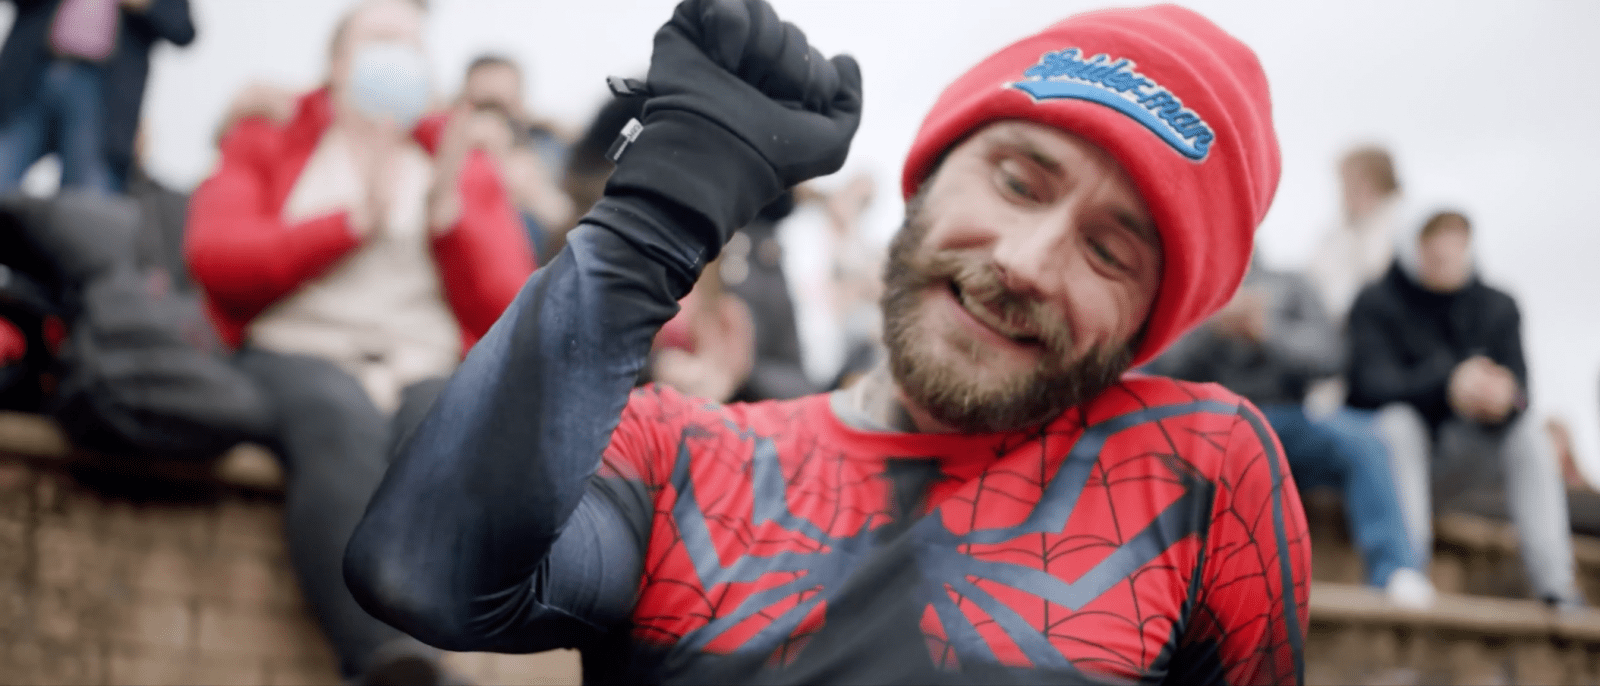 The Stockport Spider-Man raises over £14k by running three marathons in 24 hours, The Manc